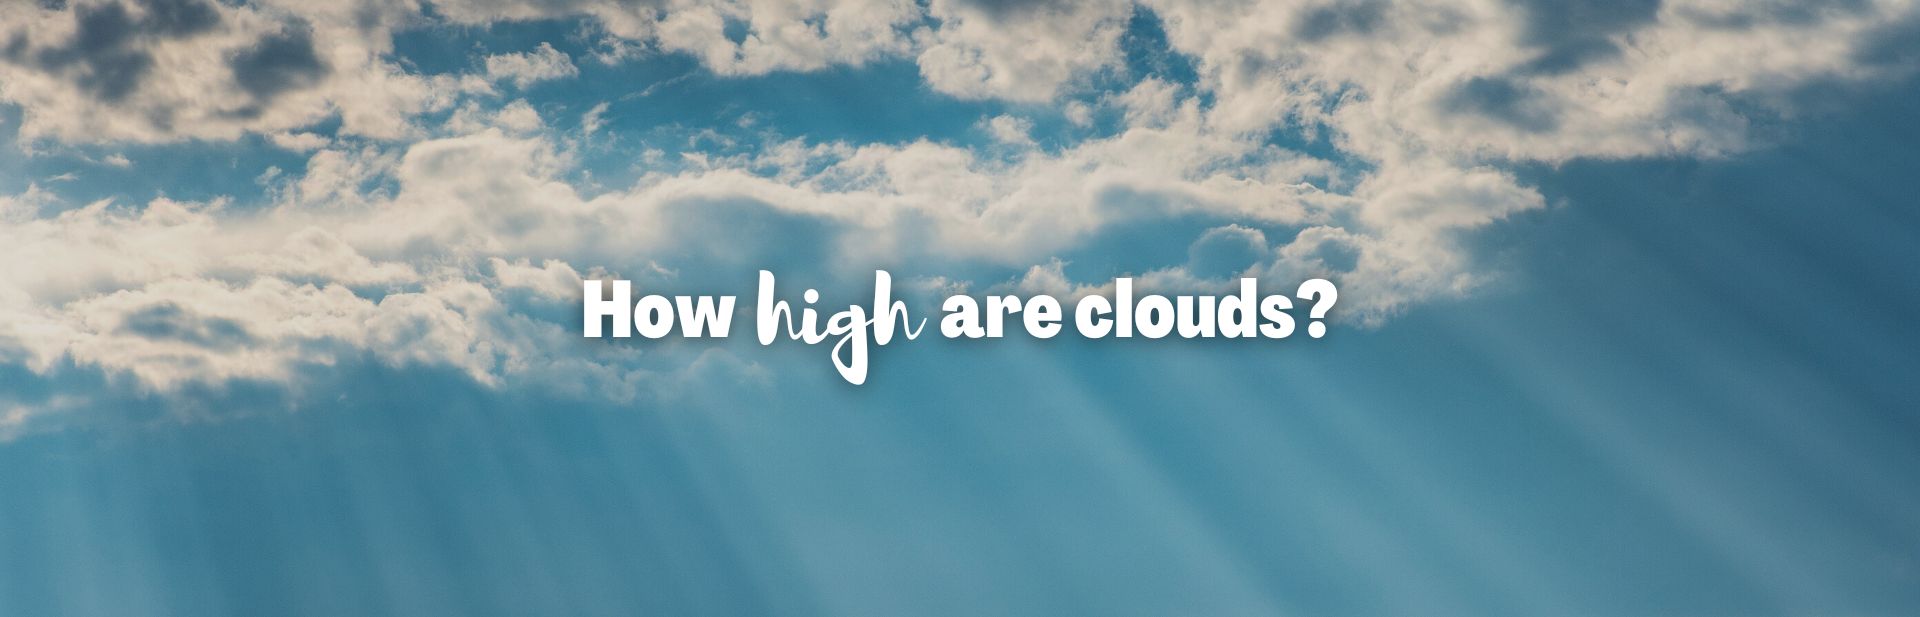 How High Are Clouds in the Sky? Cirrus-ly High!